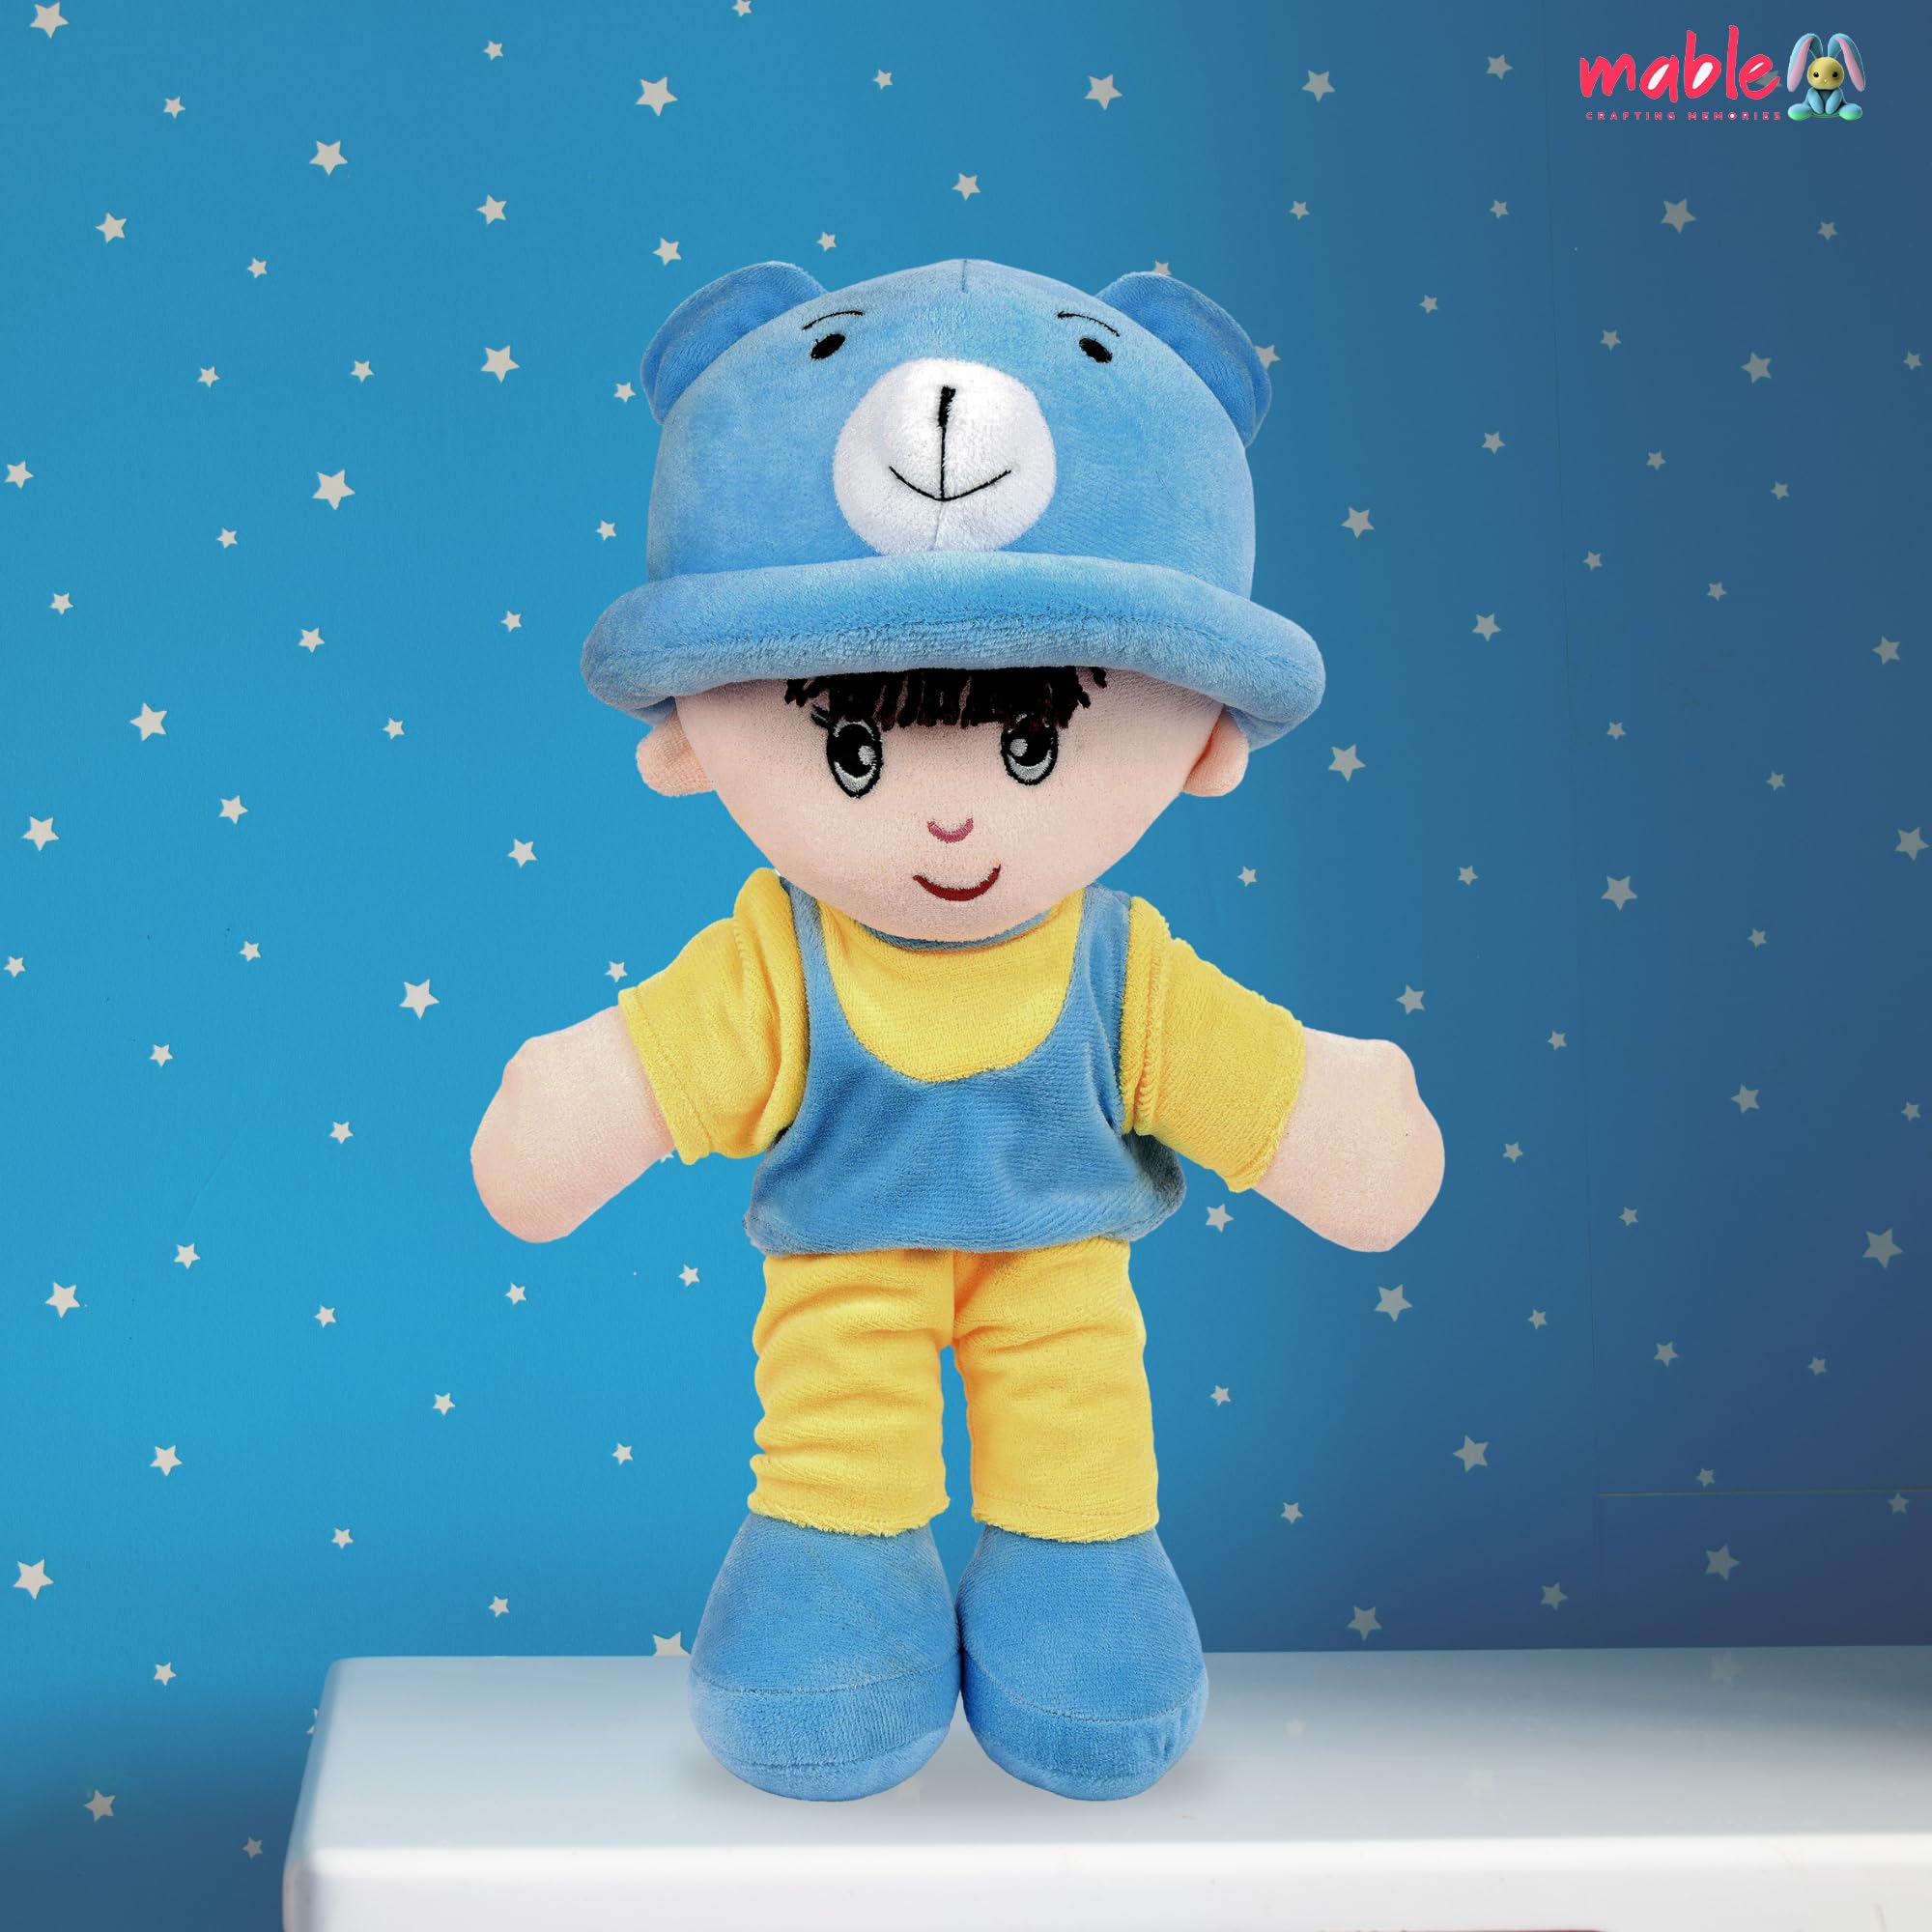 Addie Boy Rag Doll for Kids Huggable & Adorable Plush for Toddlers | Baby Doll with Hat for Boys and Girls | Soft and Cuddly Stuffed Toy for Babies | Made in India (Blue, 35cm)